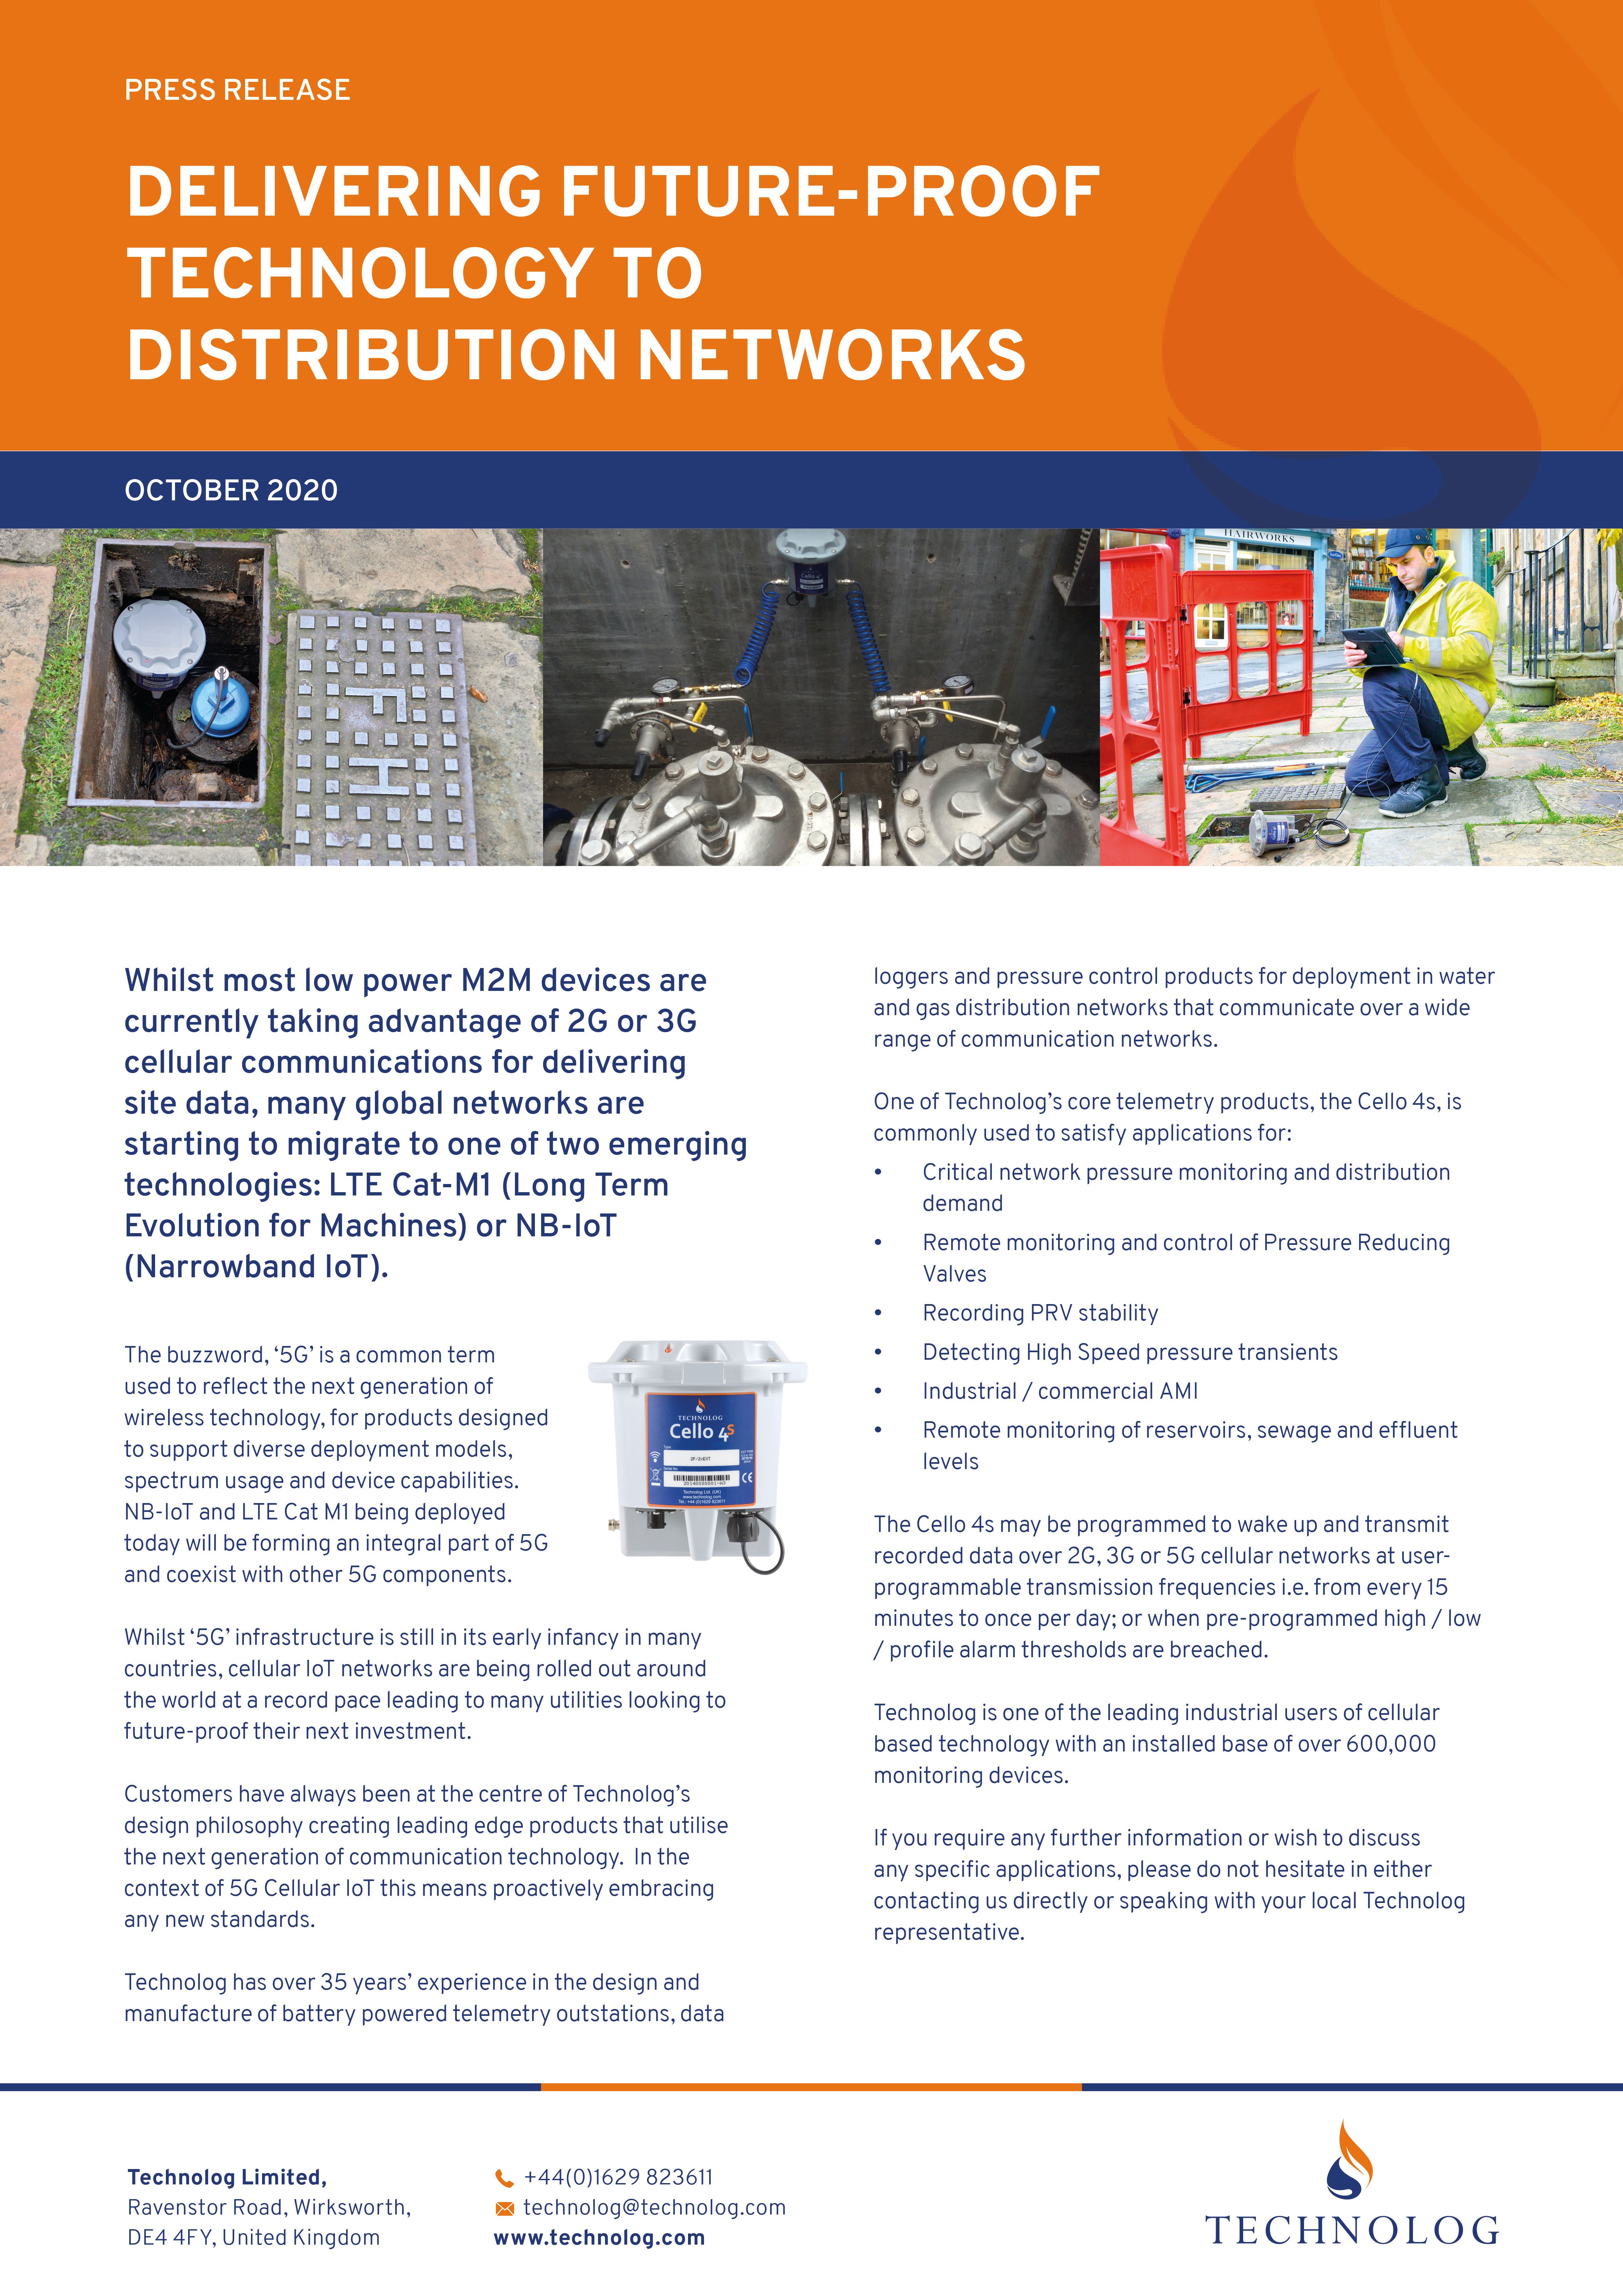 DELIVERING FUTURE-PROOF TECHNOLOGY TO DISTRIBUTION NETWORKS